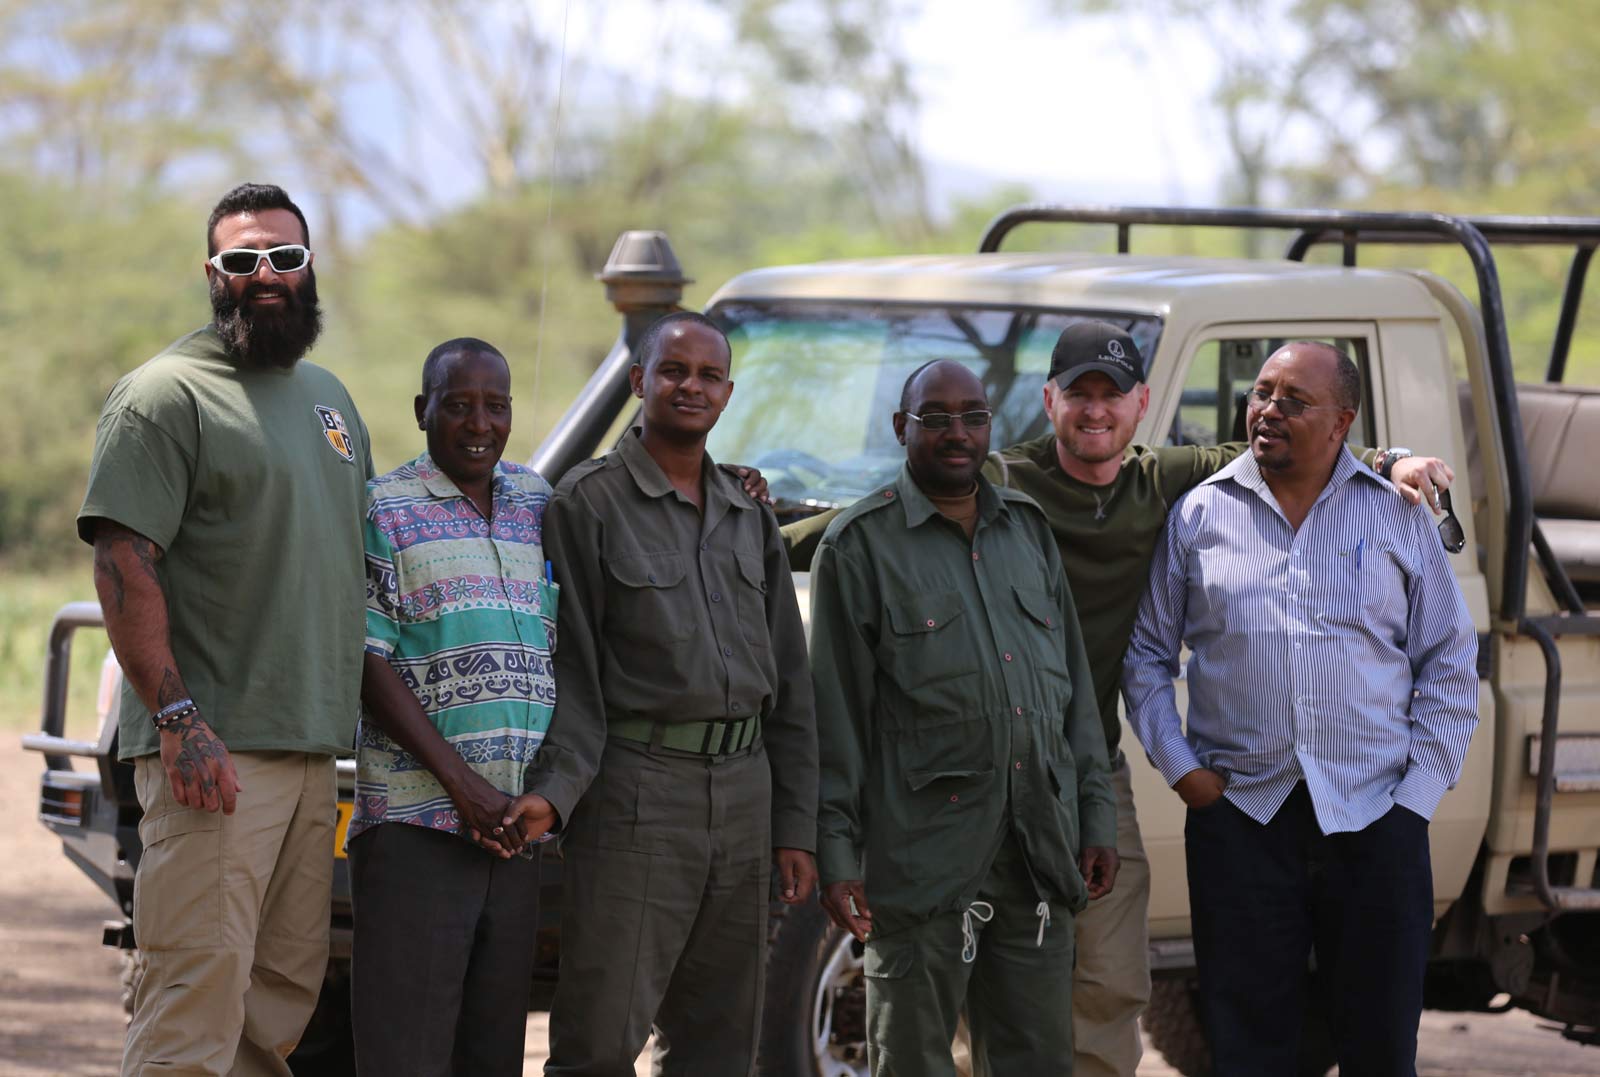 How Does Vetpaw Help Protect Endangered Animals In Africa?